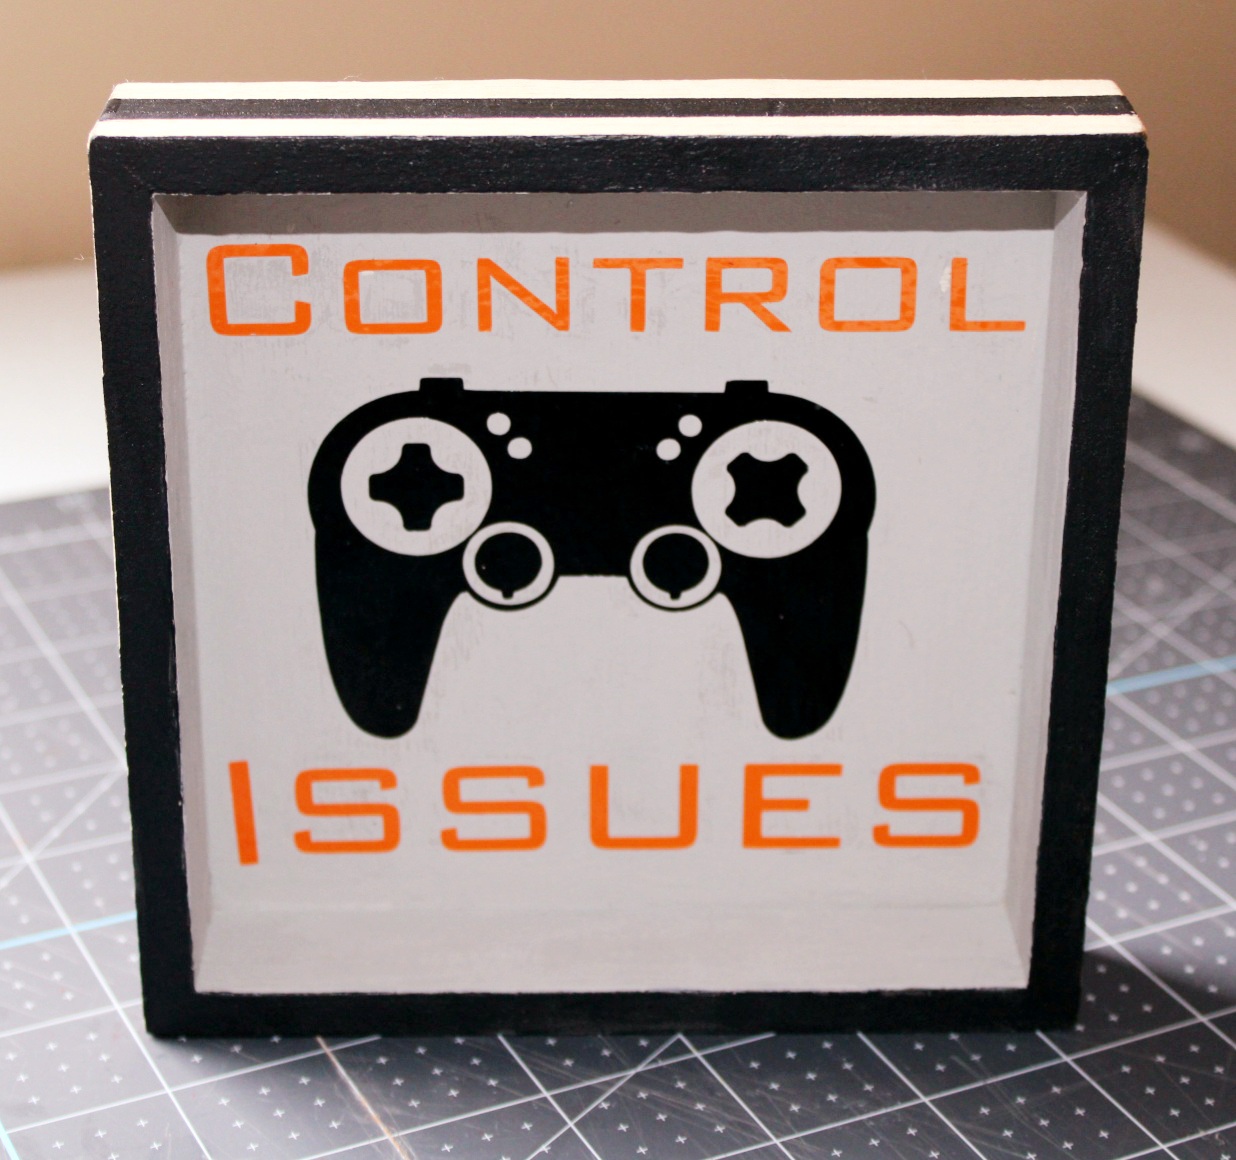 DIY gamer room sign completed. It's a 5x5 sign that is similar to a shadowbox. The outer frame is light colored wood with a black stripe painted in the middle, the front is black, the insides are painted gray, and there is a picture of a gaming controller in black with the word "control" issues in orange above the controller and "issues" in orange underneath.